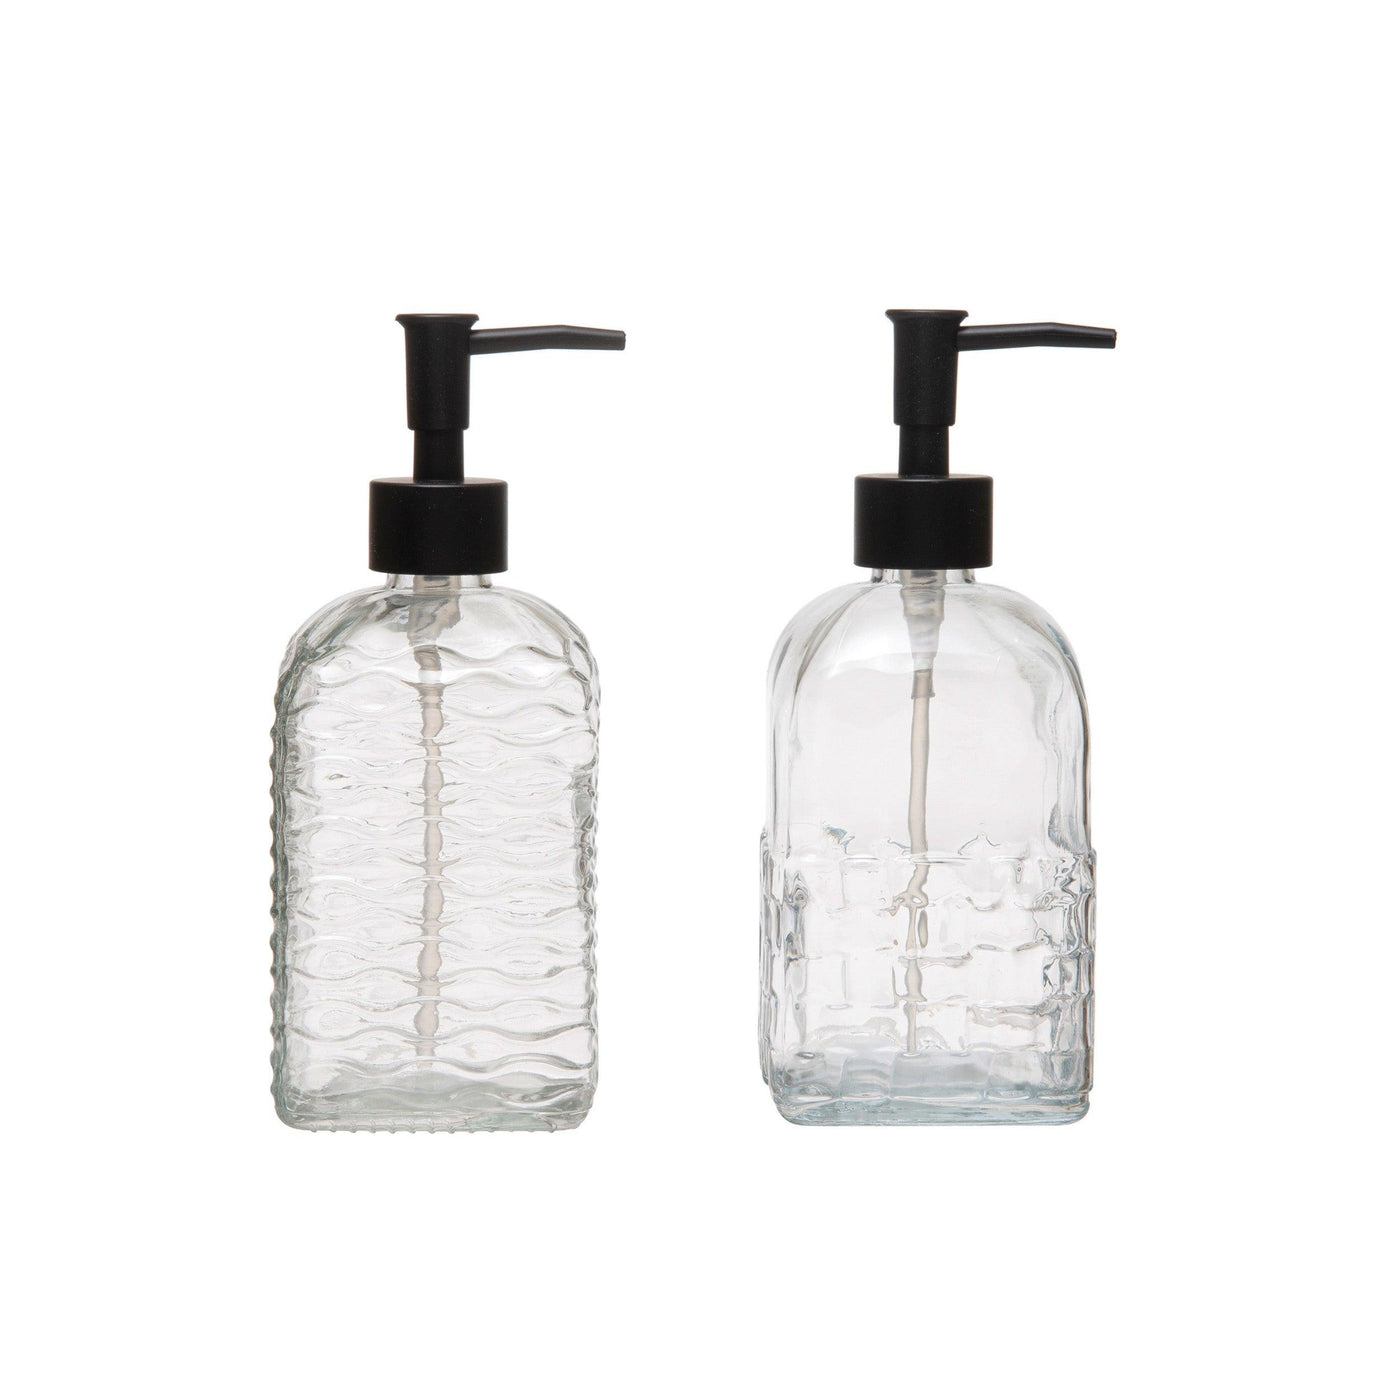 Embossed Glass Soap Dispenser - Birch and Bind